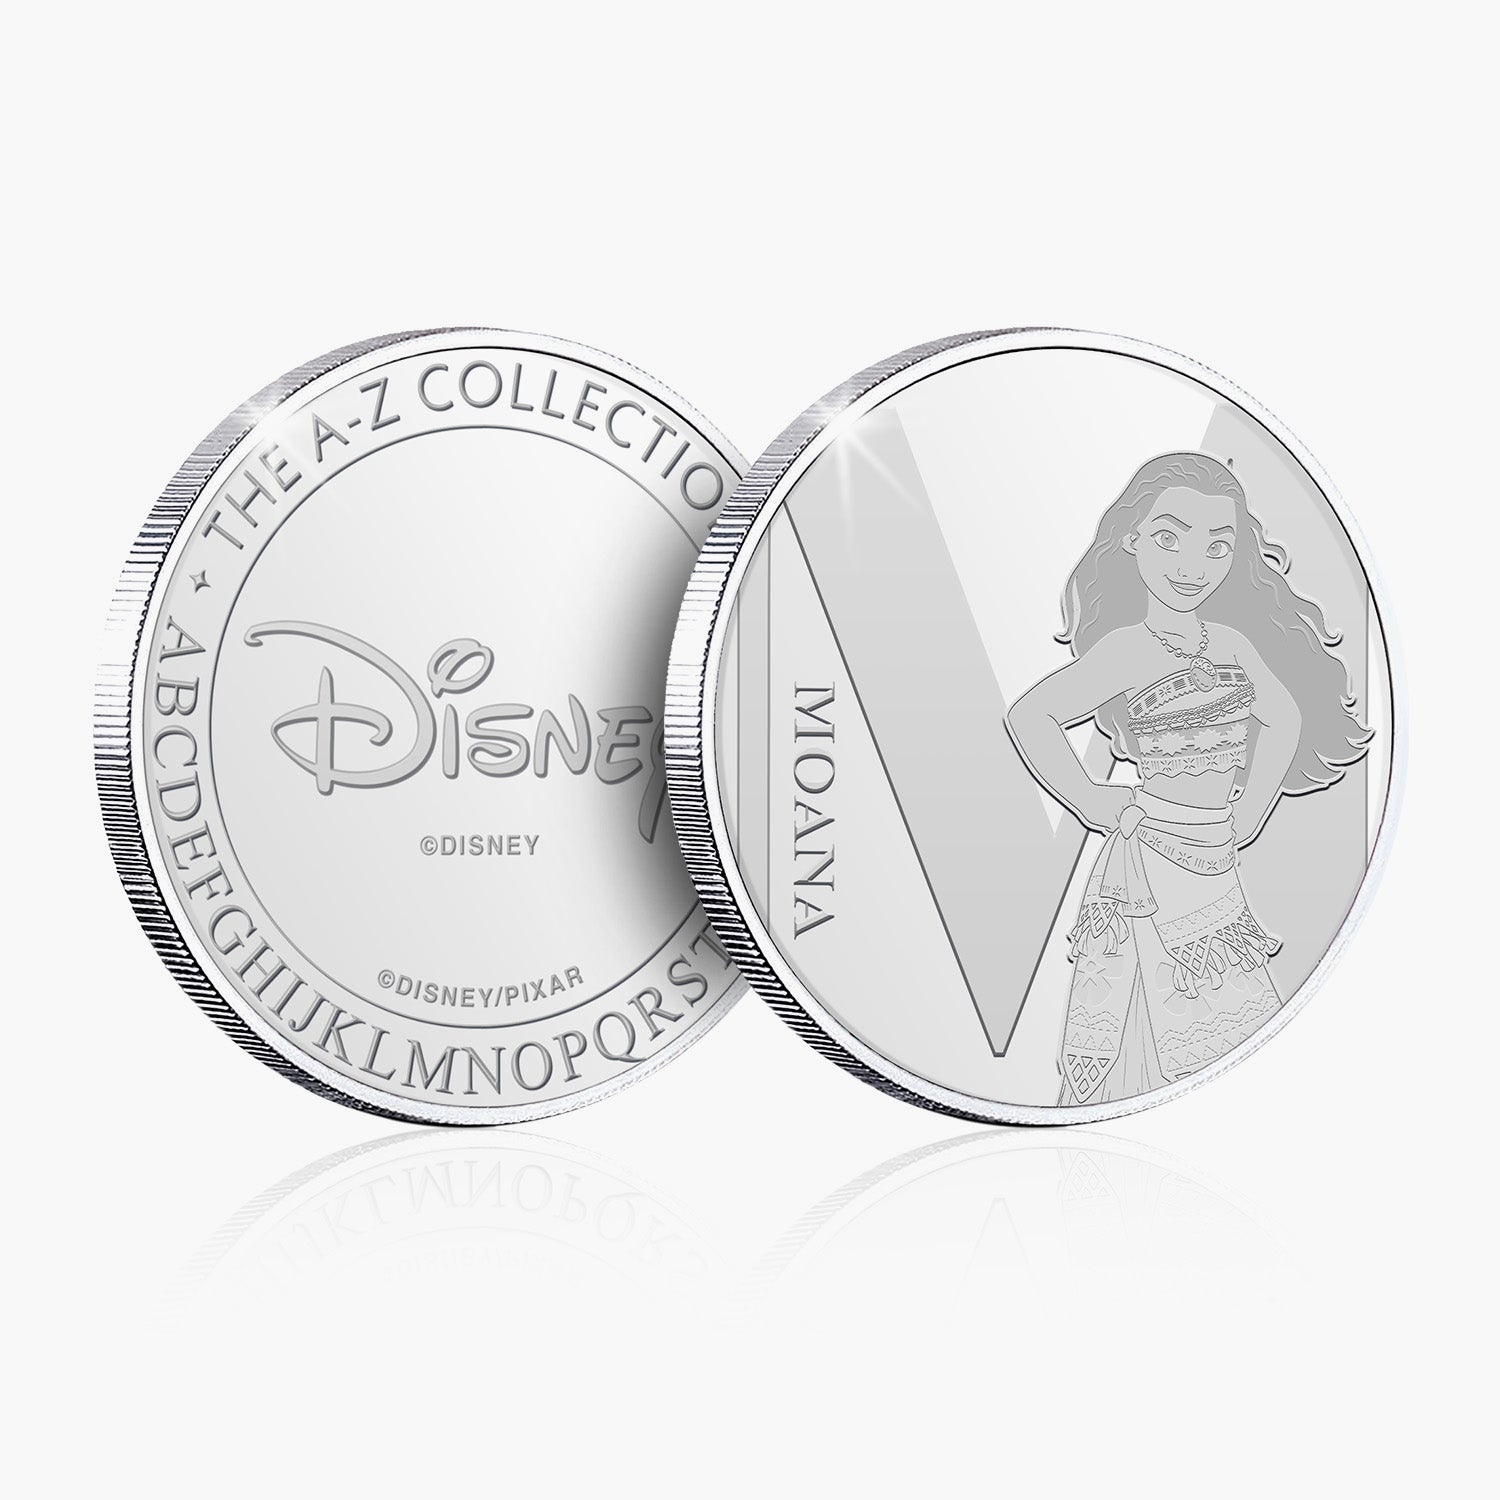 M Is For Moana Silver-Plated Commemorative